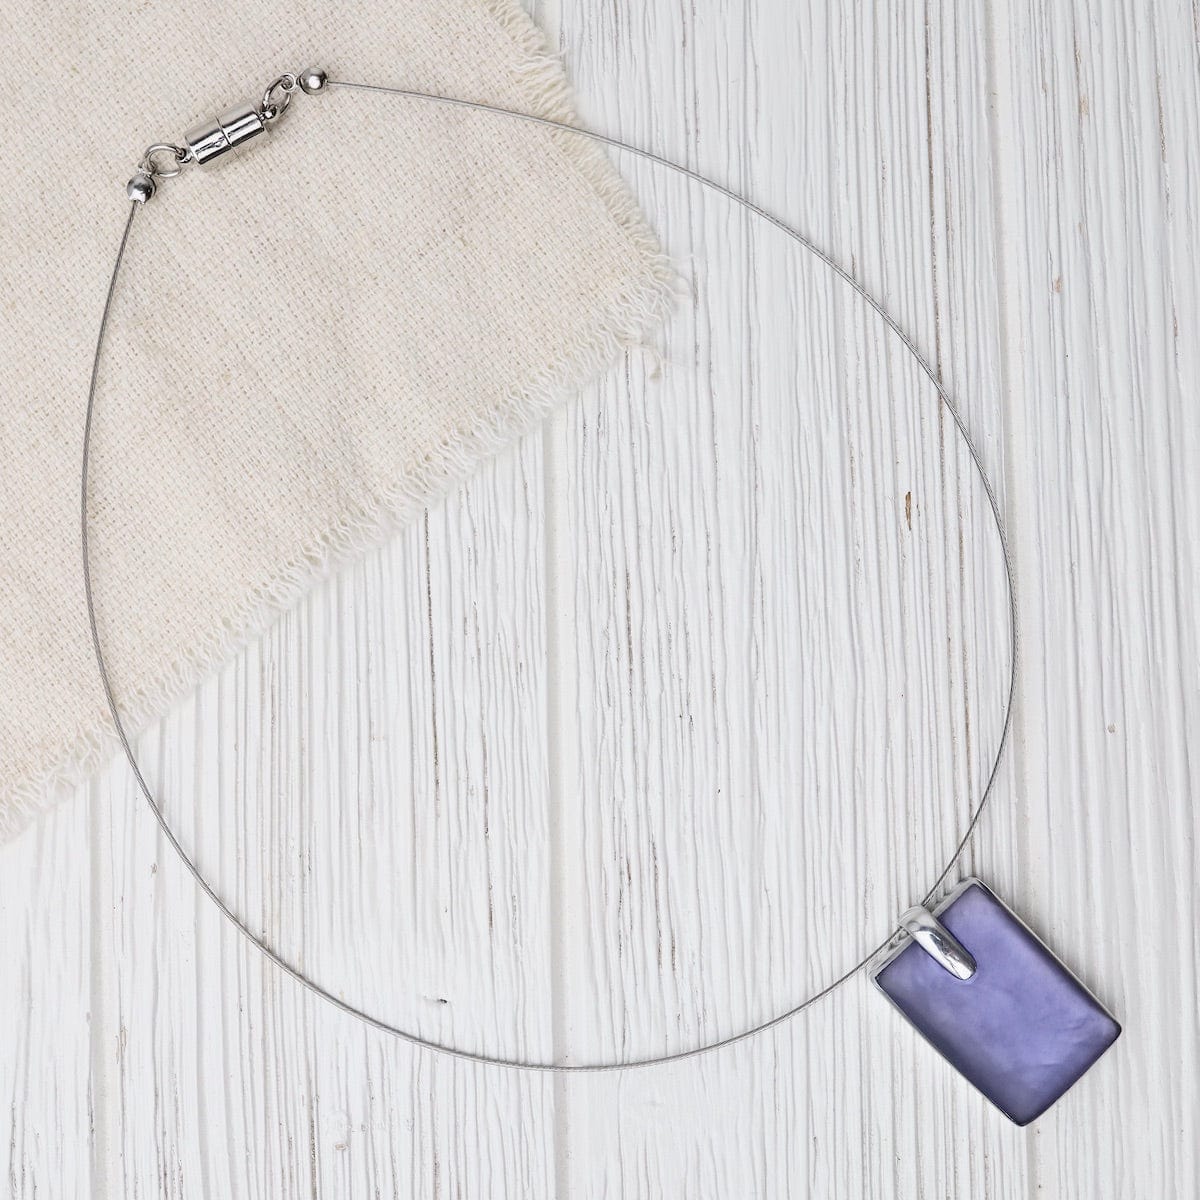 NKL Periwinkle Rectangle Pendant Necklace